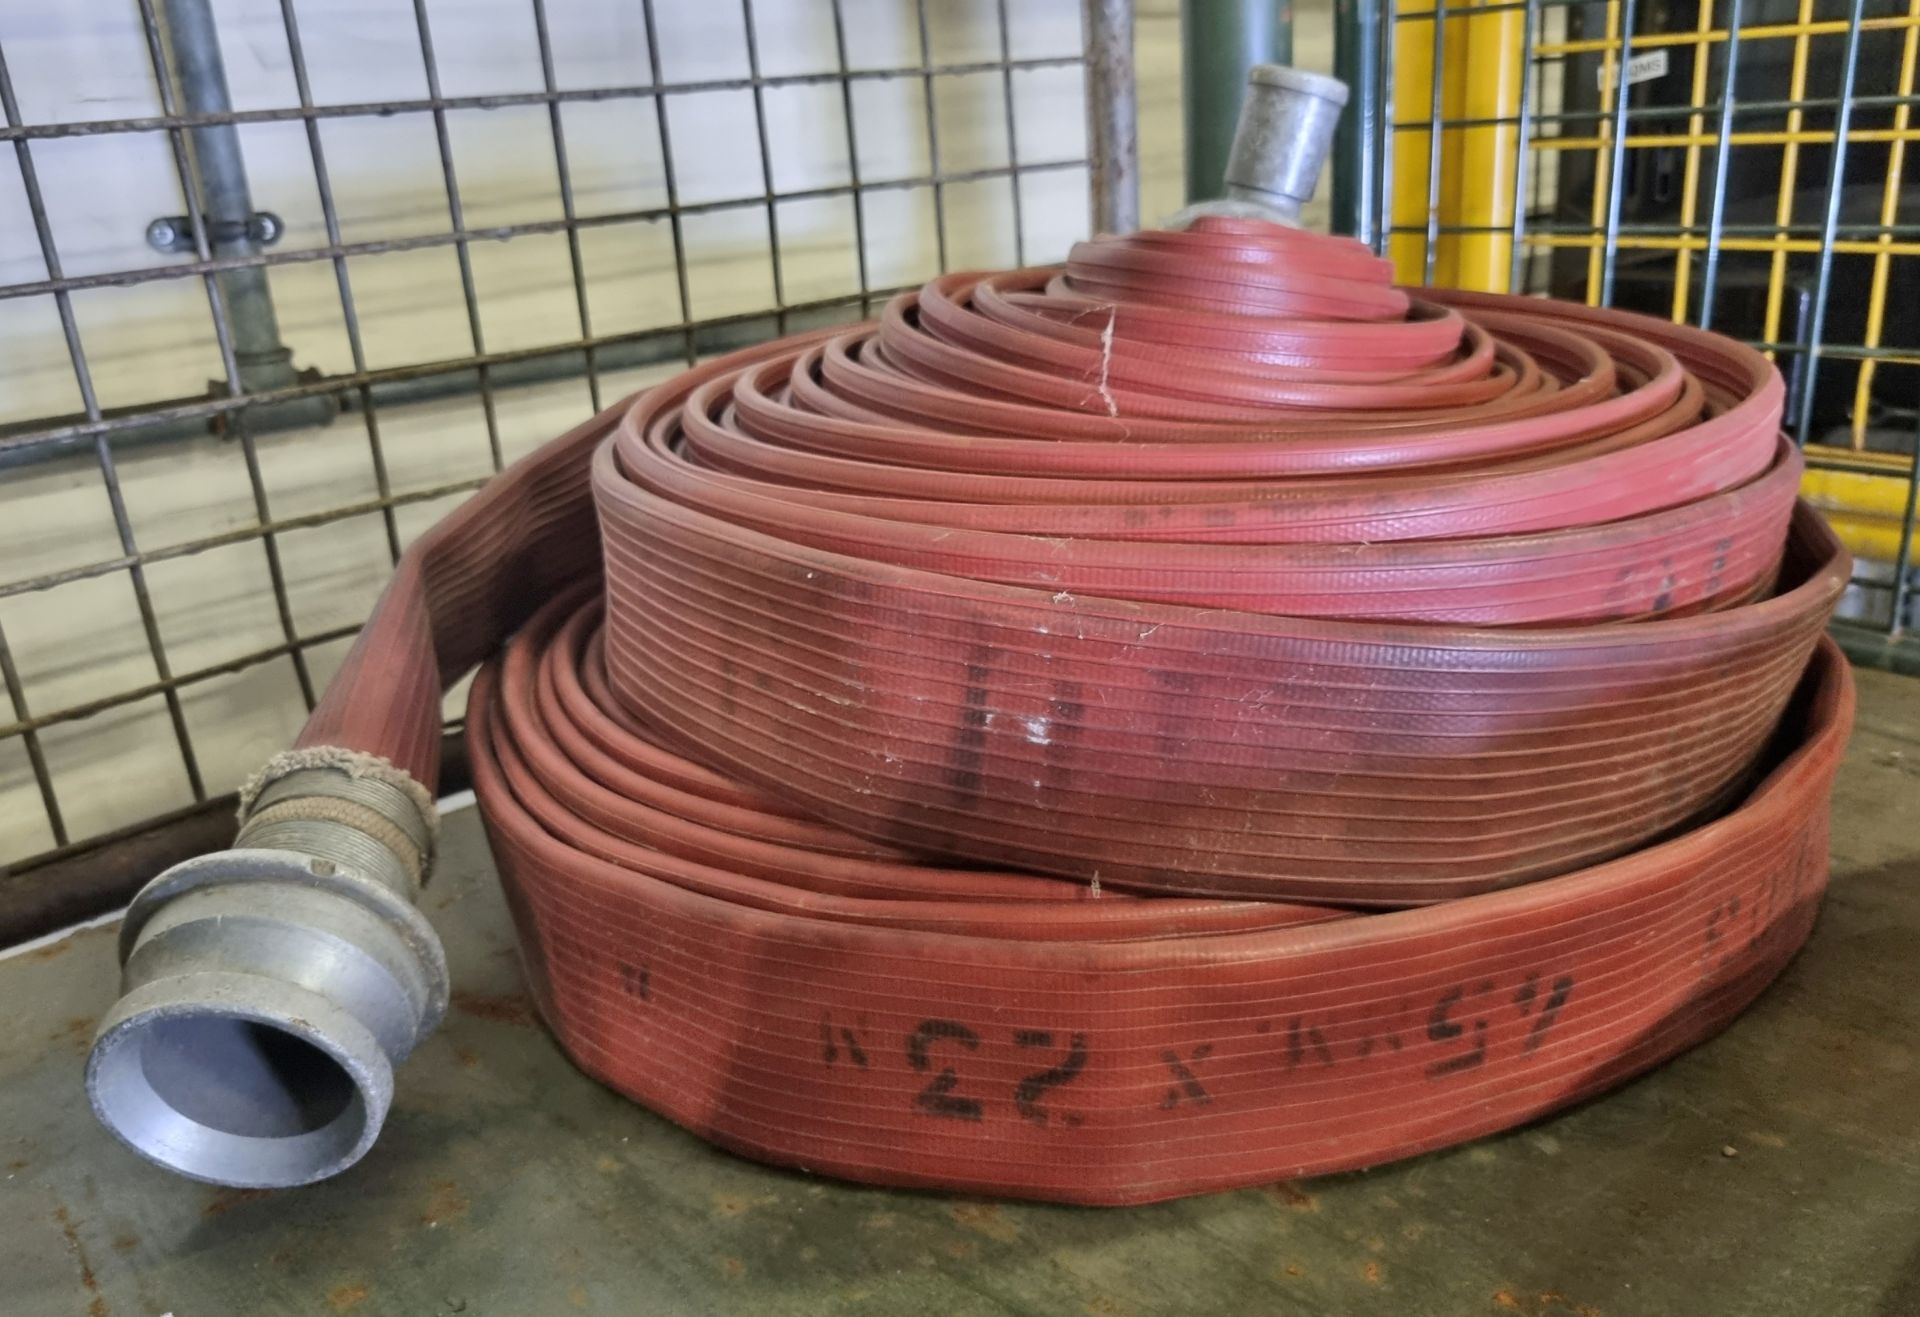 2x Angus Duraline 45mm lay flat hoses with couplings - approx 23m in length, Red lay flat hose - Bild 4 aus 4